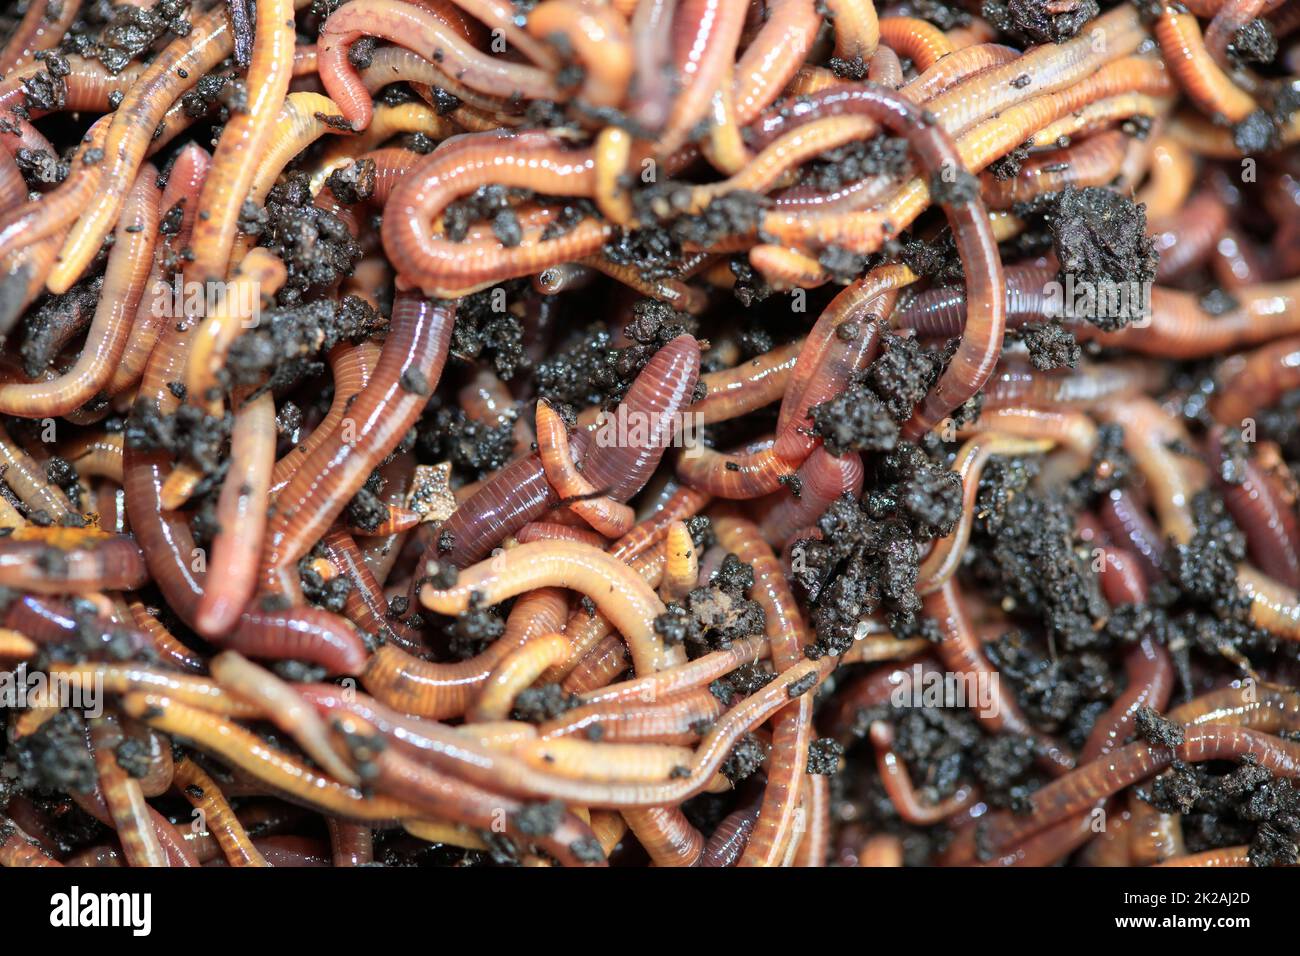 Earthworms for Fishing or Compost Stock Photo